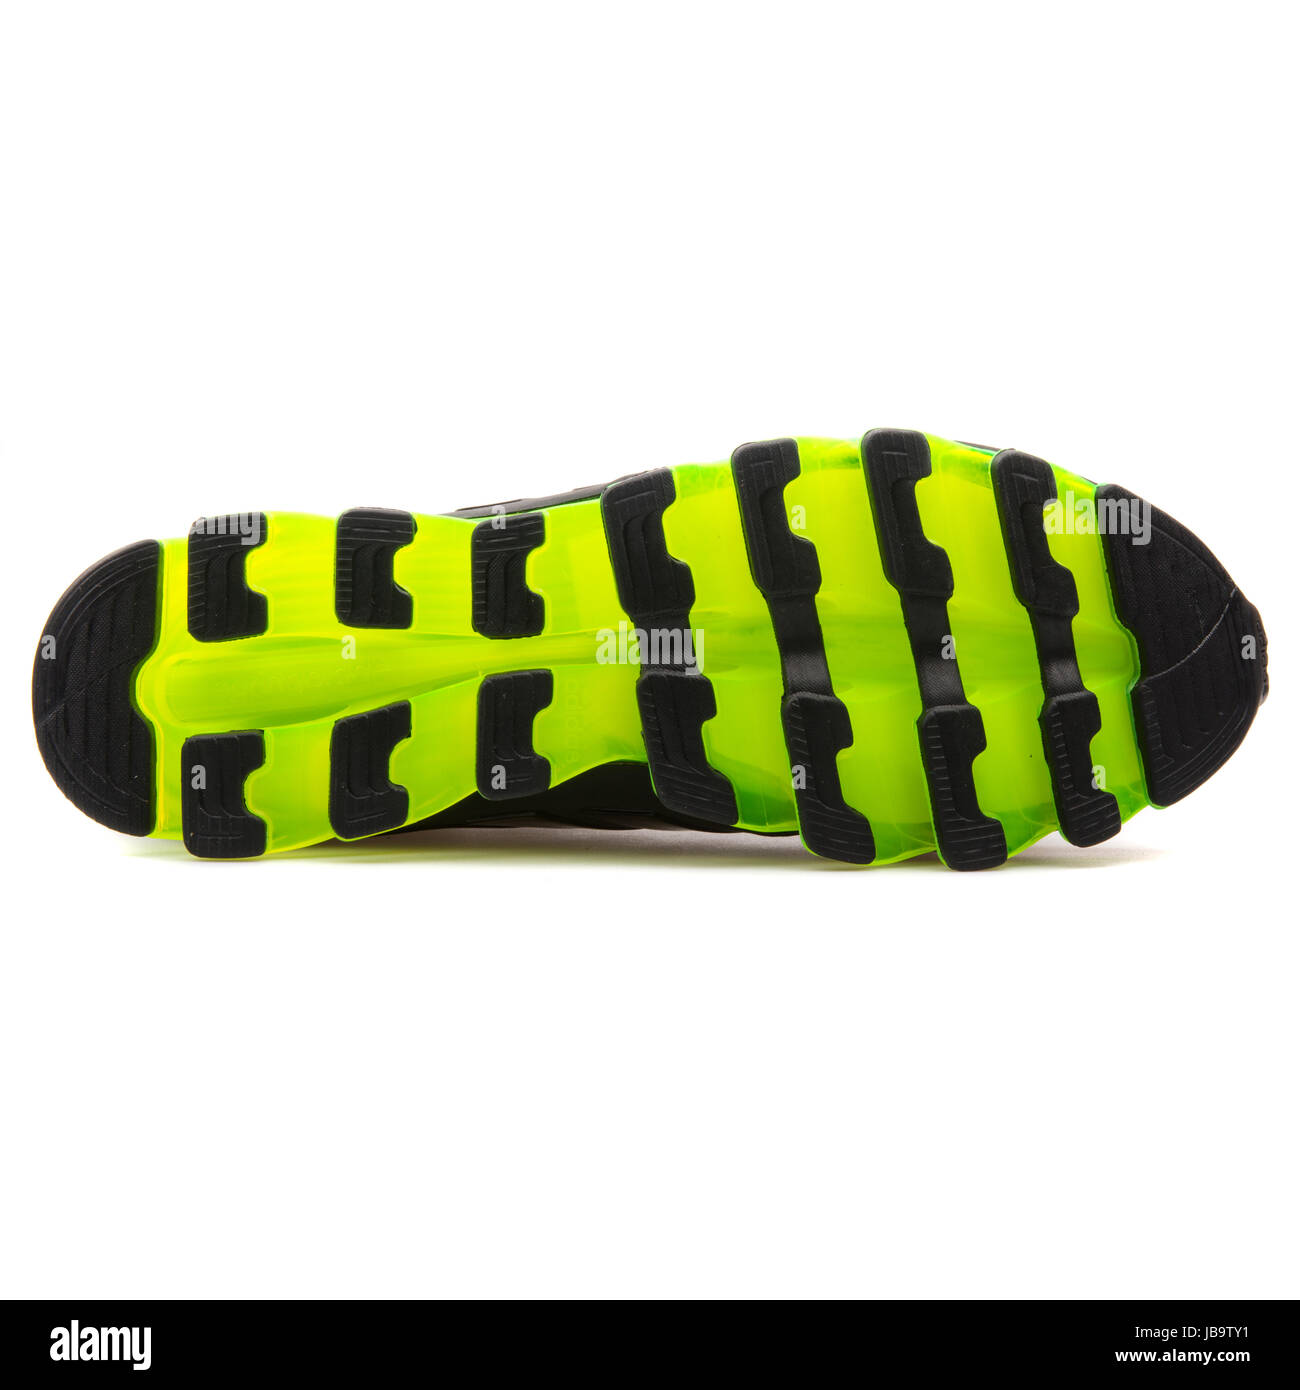 Adidas Springblade Drive 2 m Black and Green Men's Running Sneakers Stock  Photo: 144661301 - Alamy